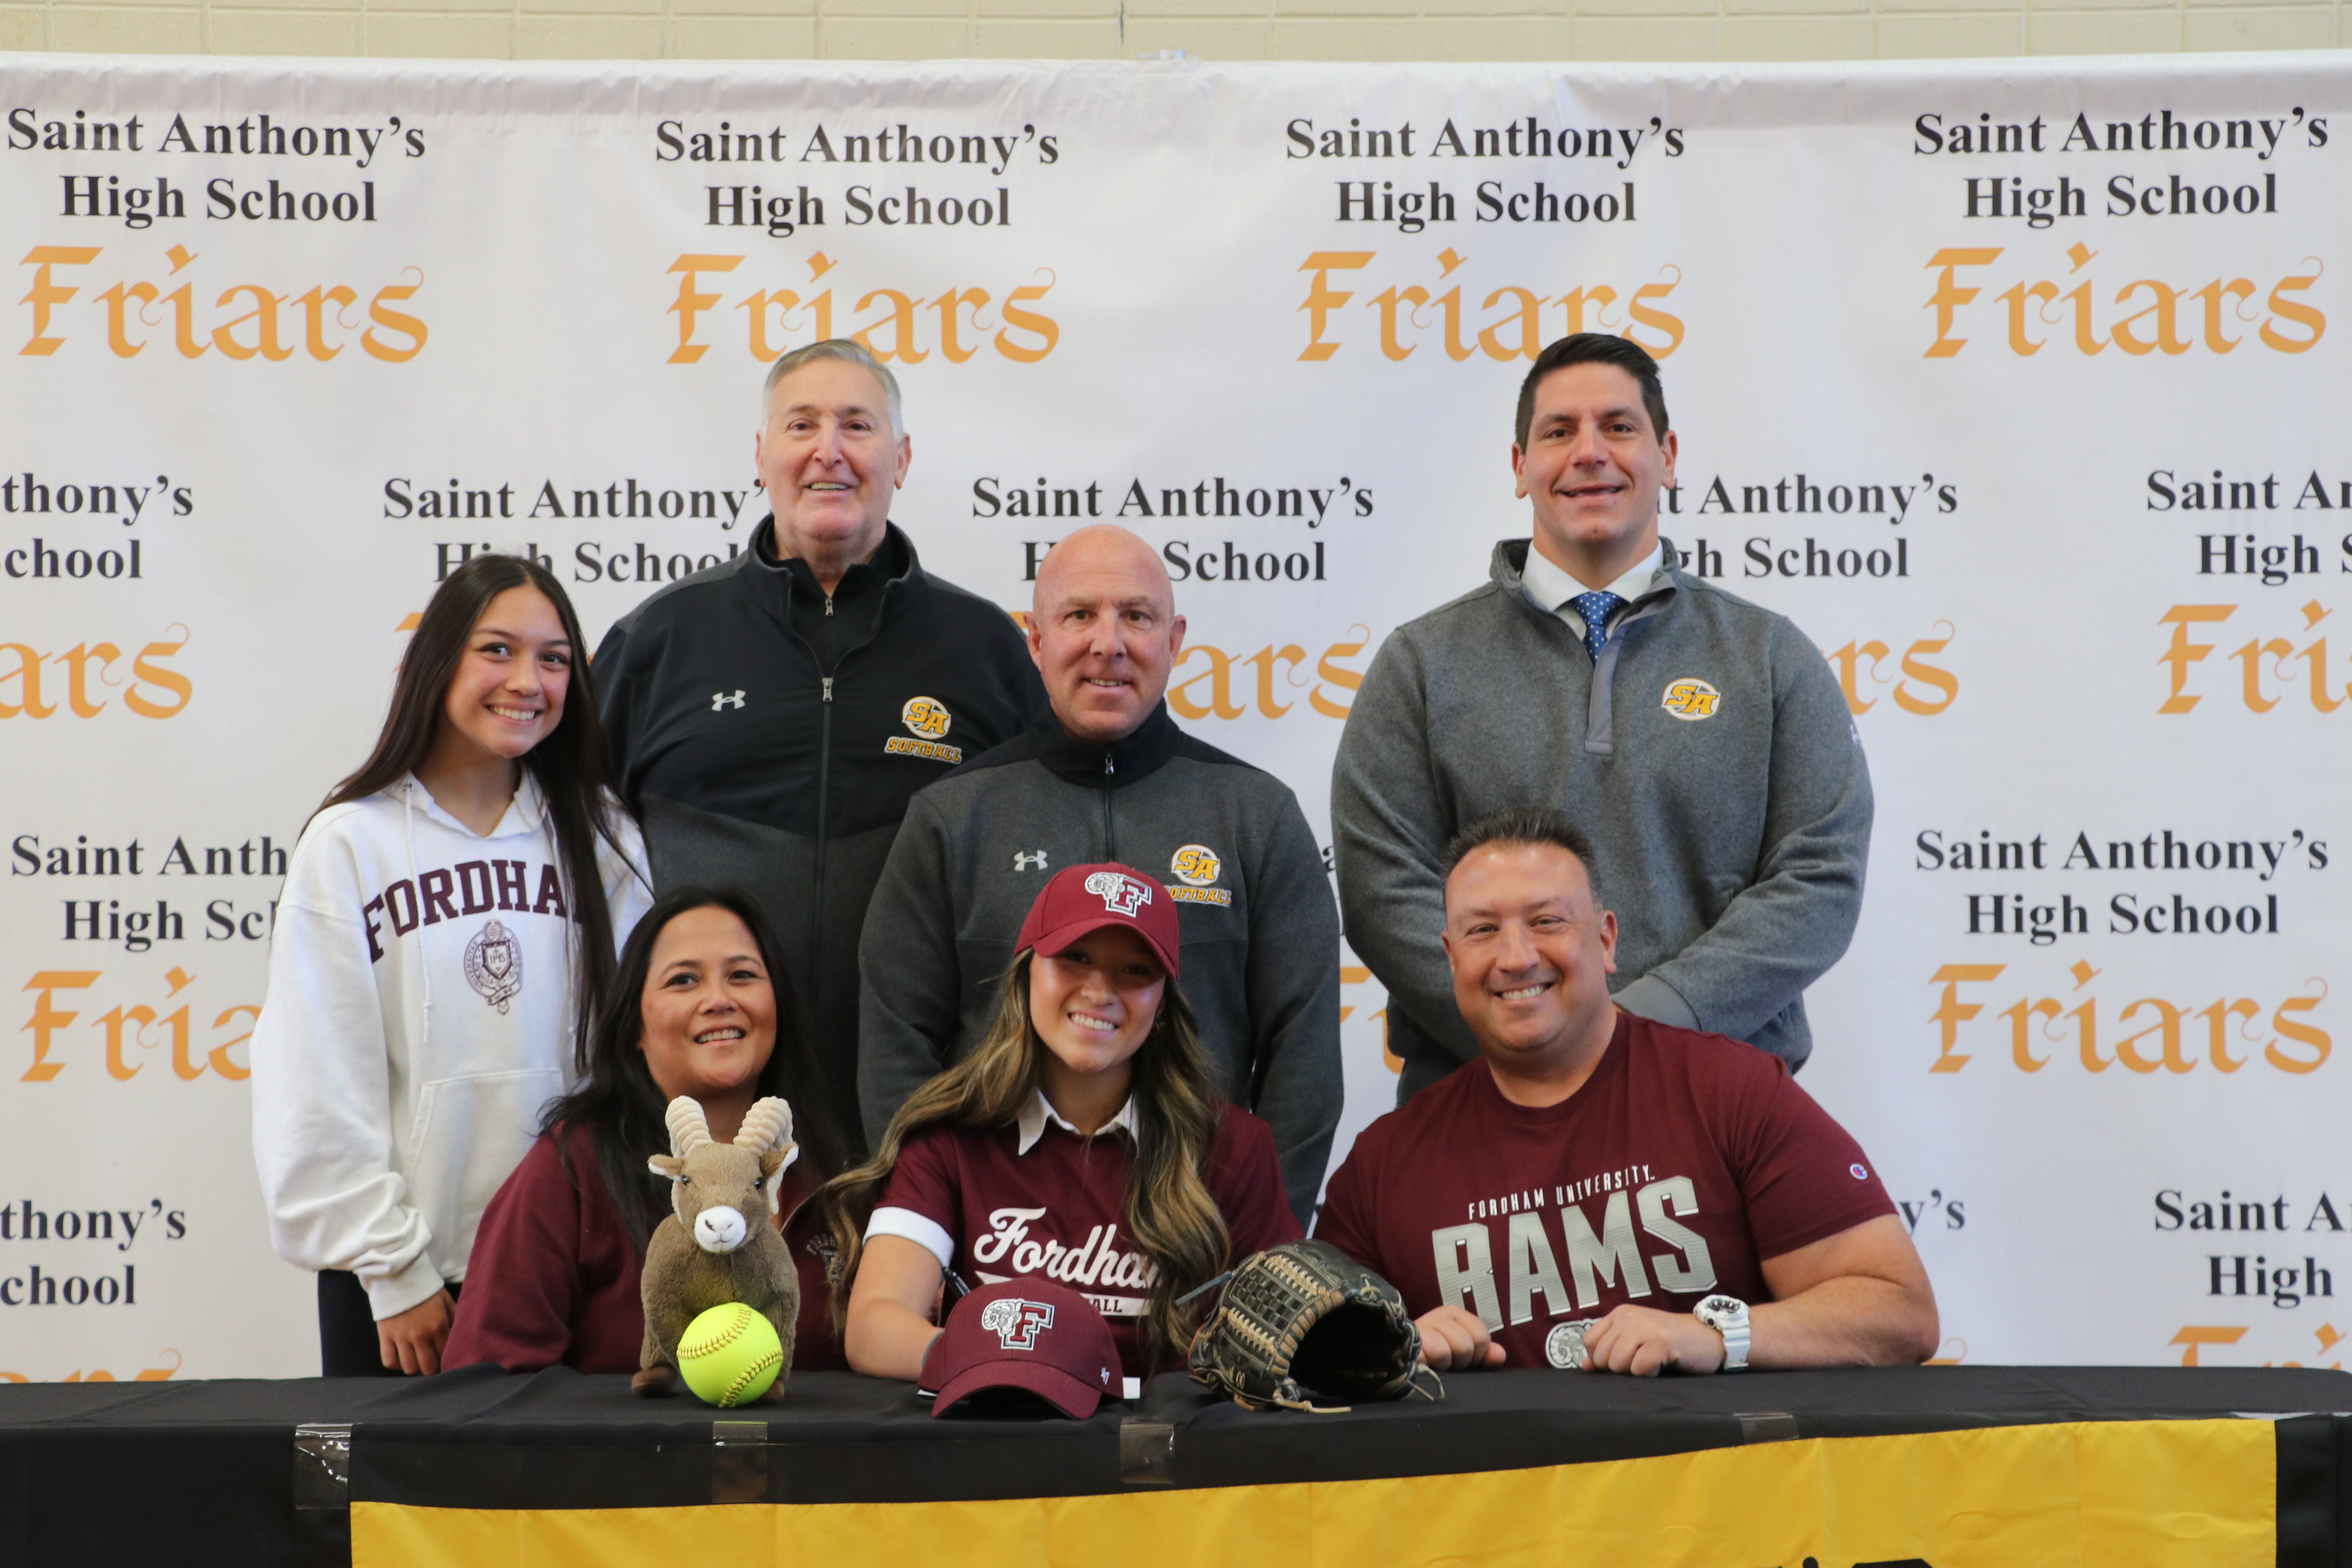 Ava Vandernoth committed to Fordham University - CONGRATULATIONS